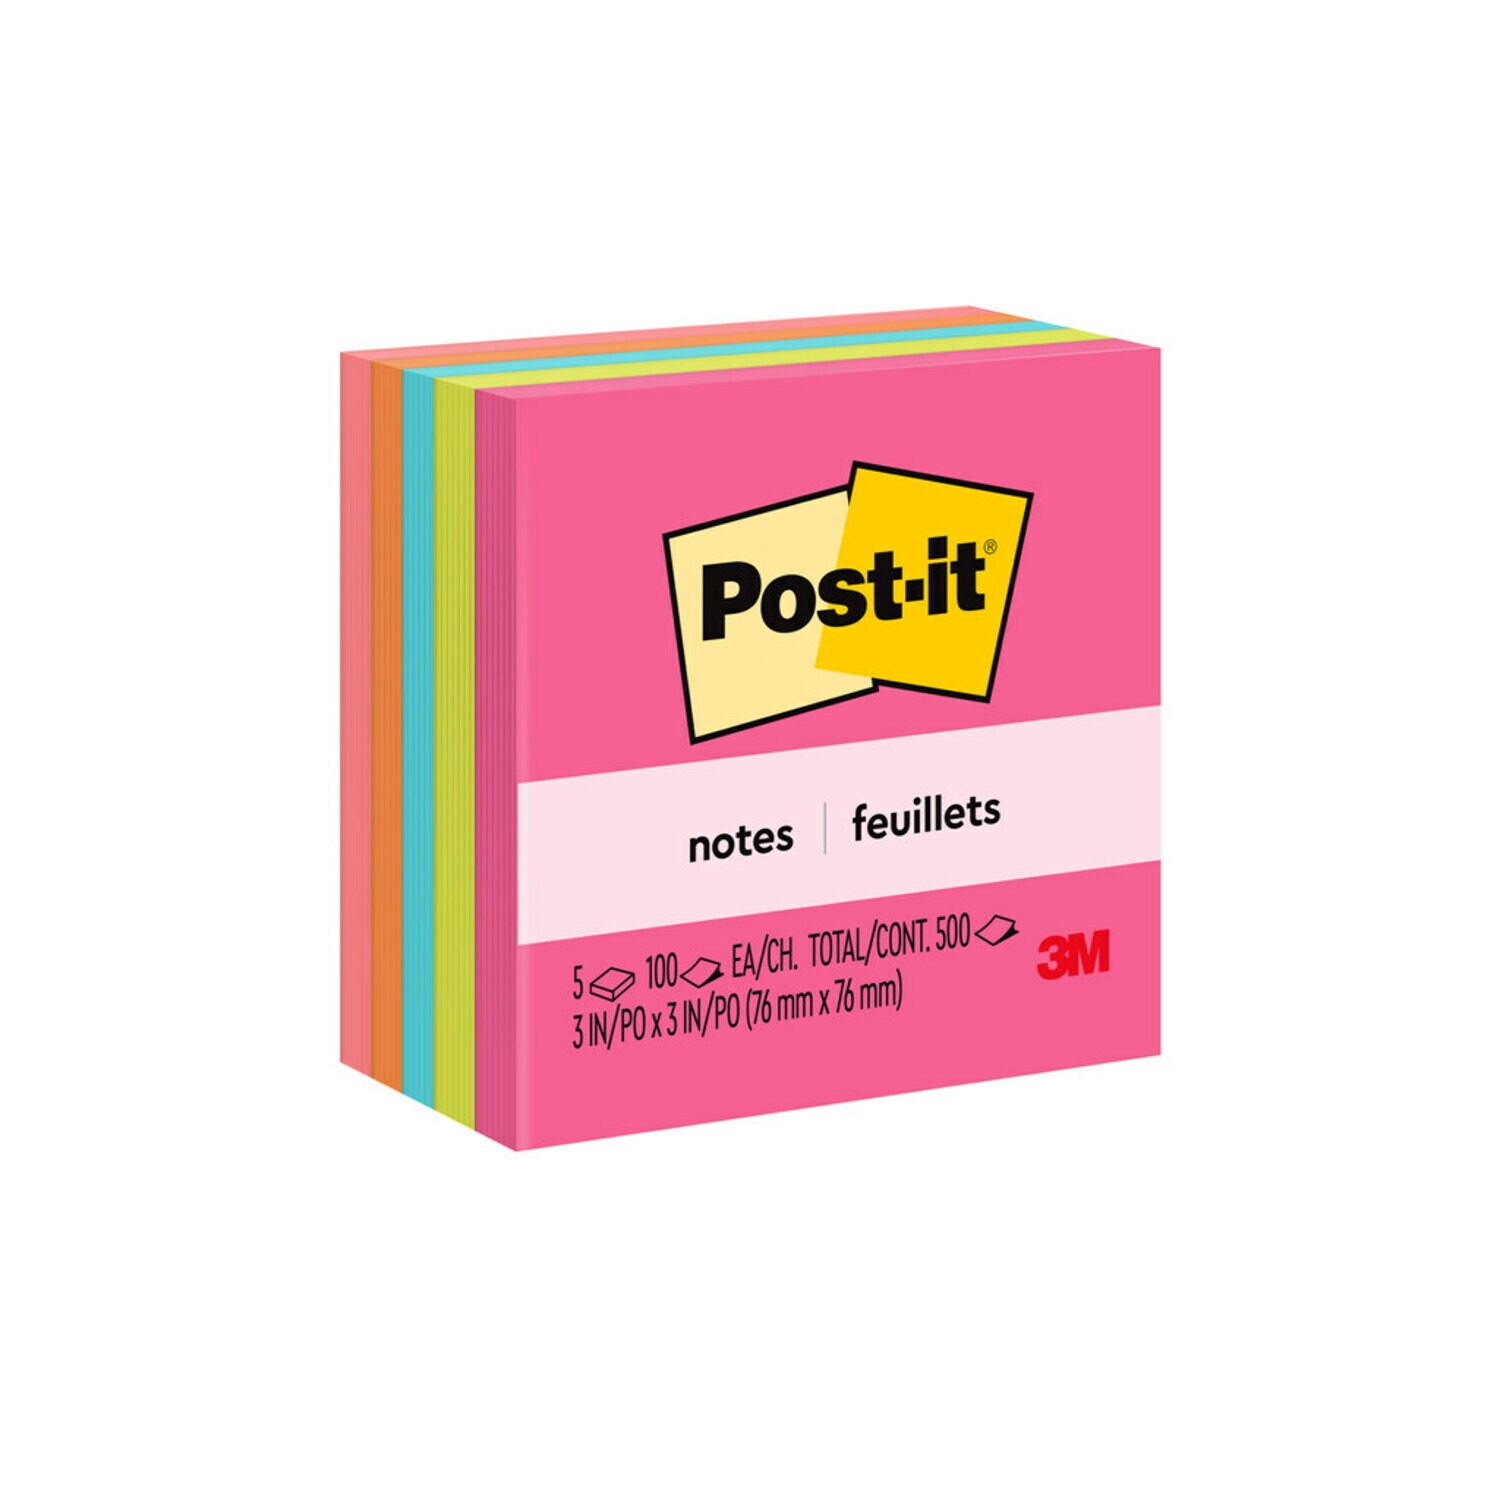 7100229687 - Post-it Notes 654-5PK, 3 in x 3 in (76 mm x 76 mm)